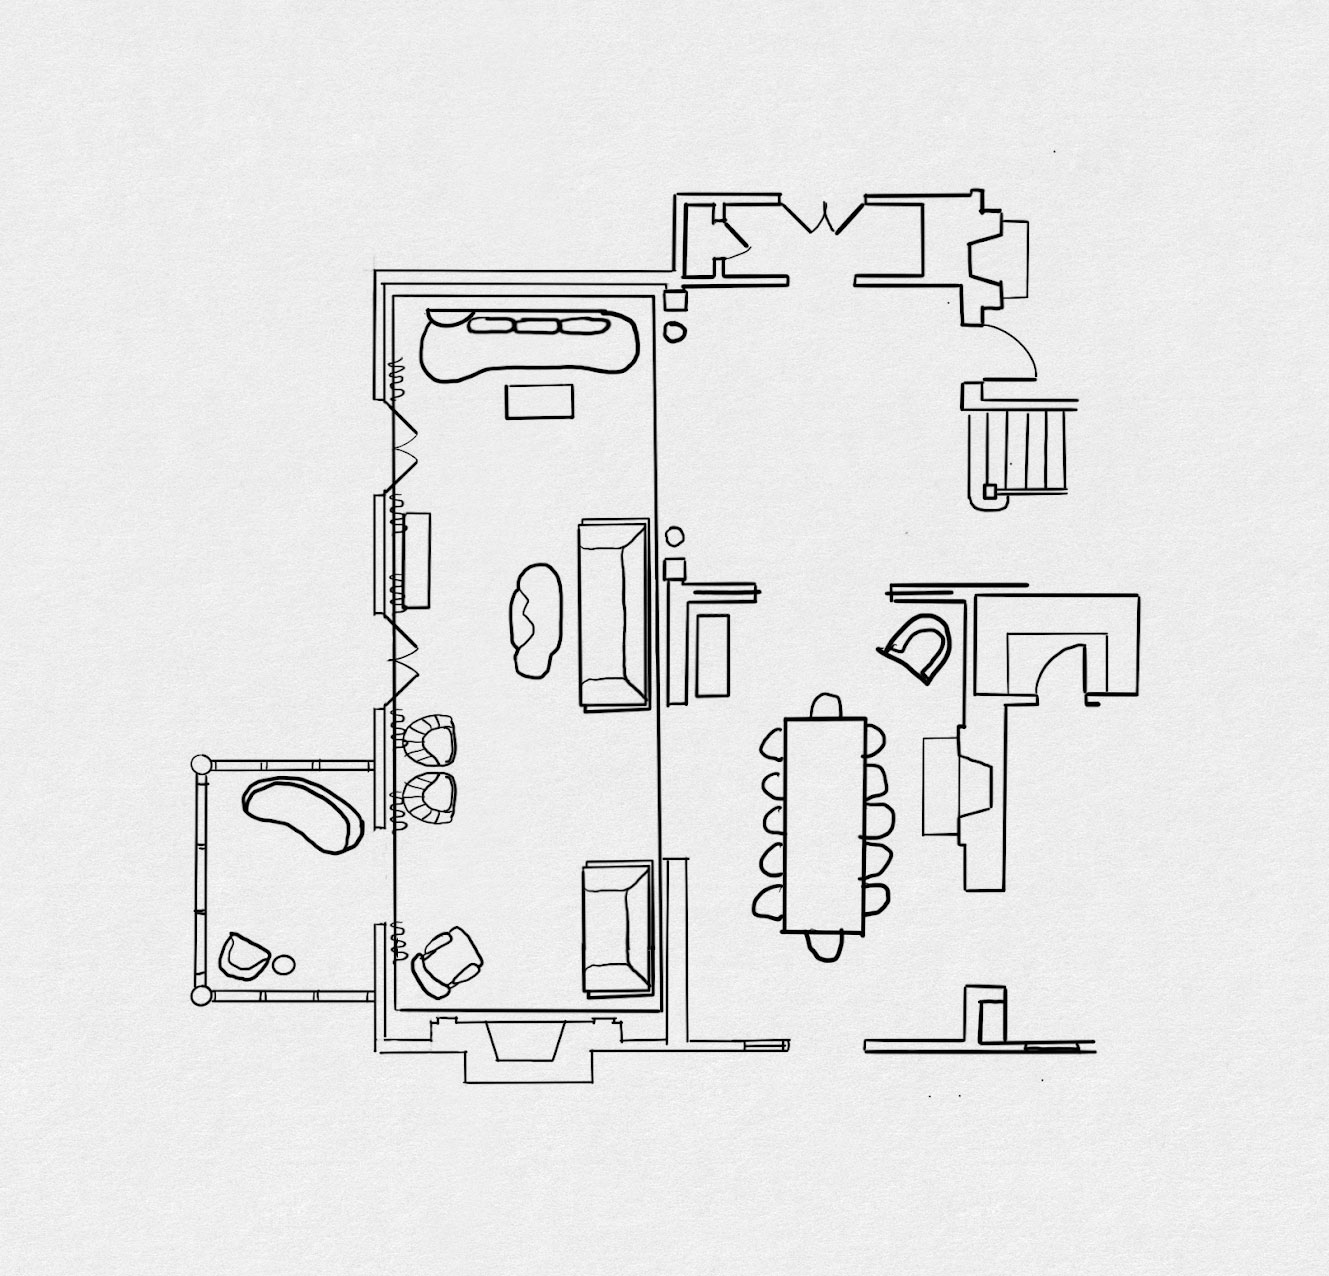 Plan view drawing of rooms with furniture